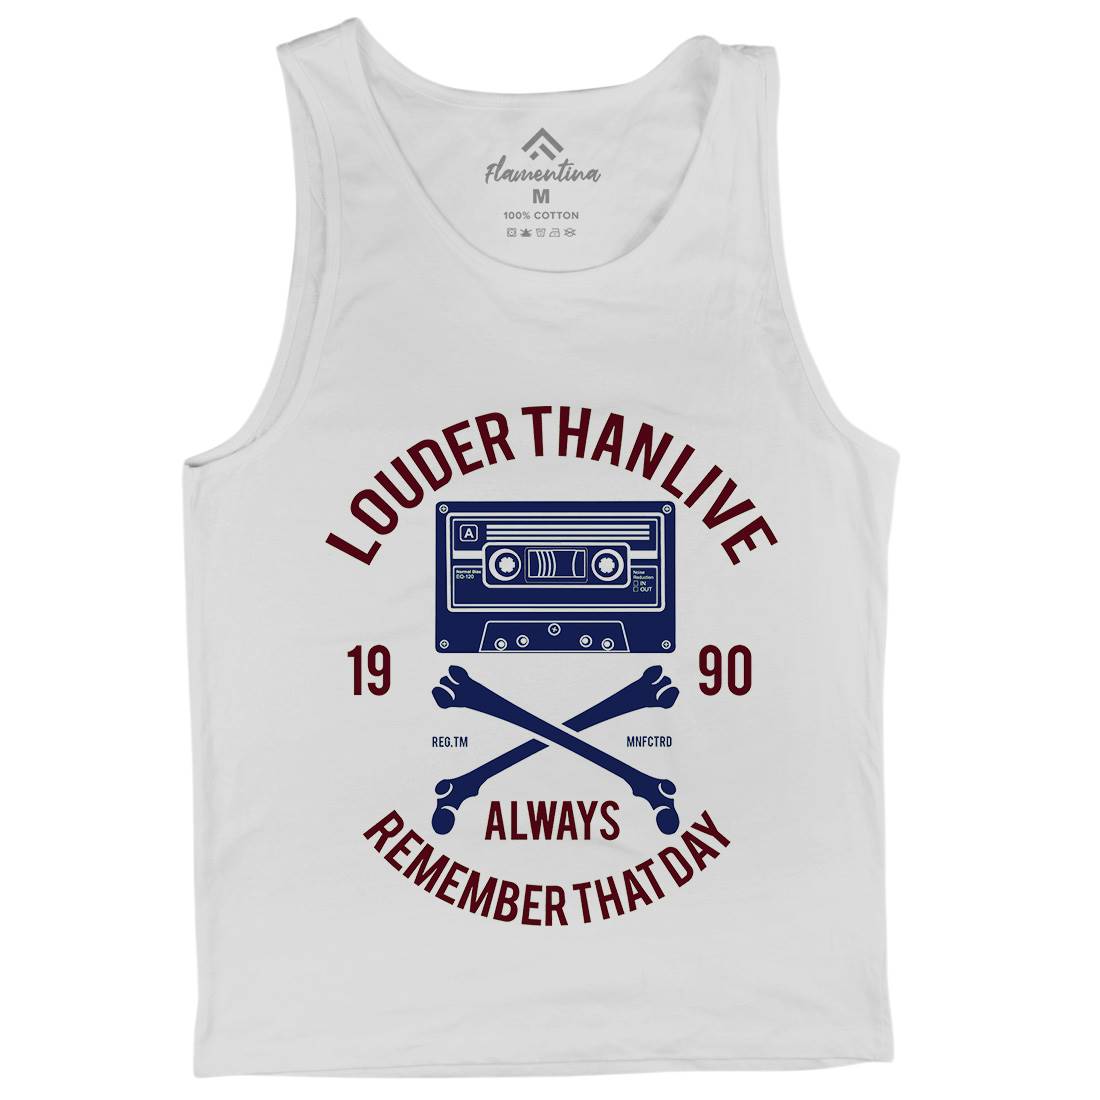 Louder Than Life Mens Tank Top Vest Music A087